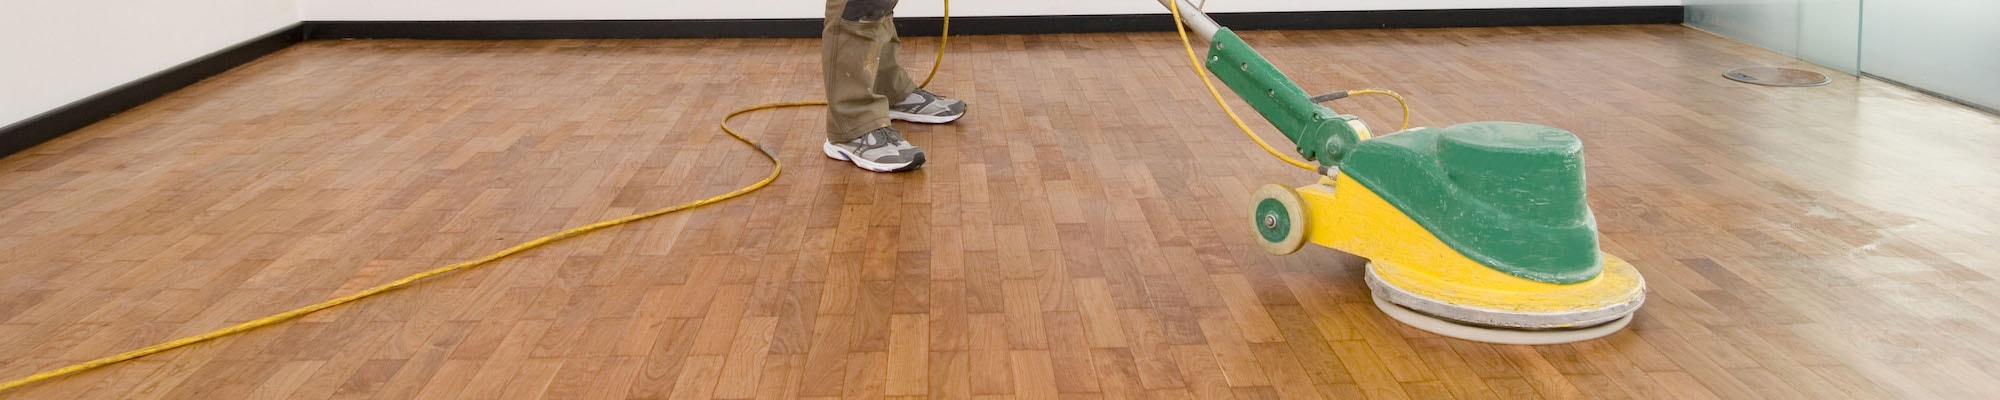 wood floor being professionally cleaned